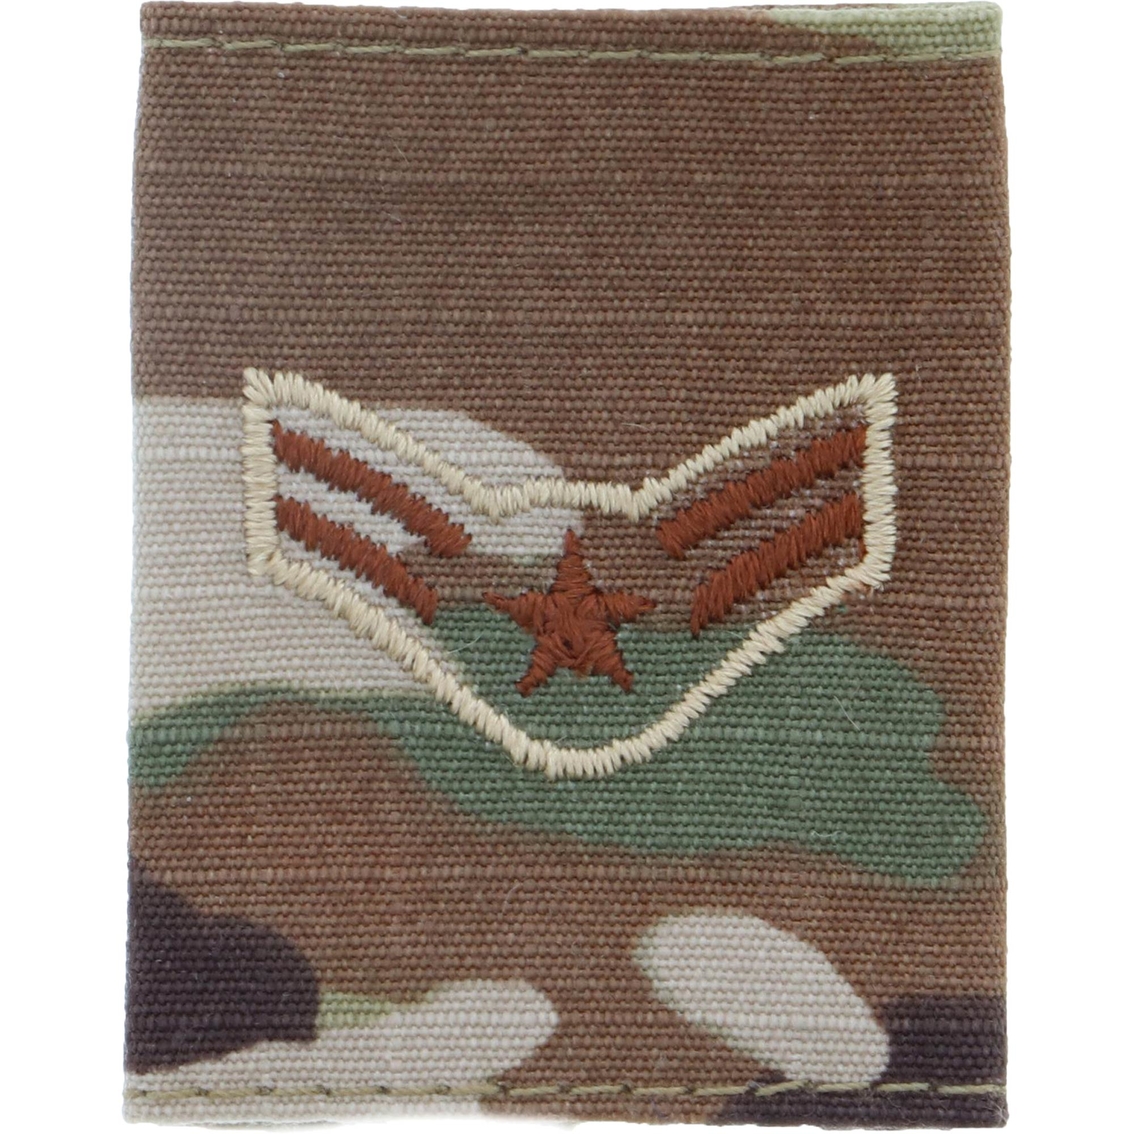 Air Force Rank A1c E 3 Slide On Gortex Ocp 1 Pc Enlisted Apecs Velcro Rank Military Shop The Exchange